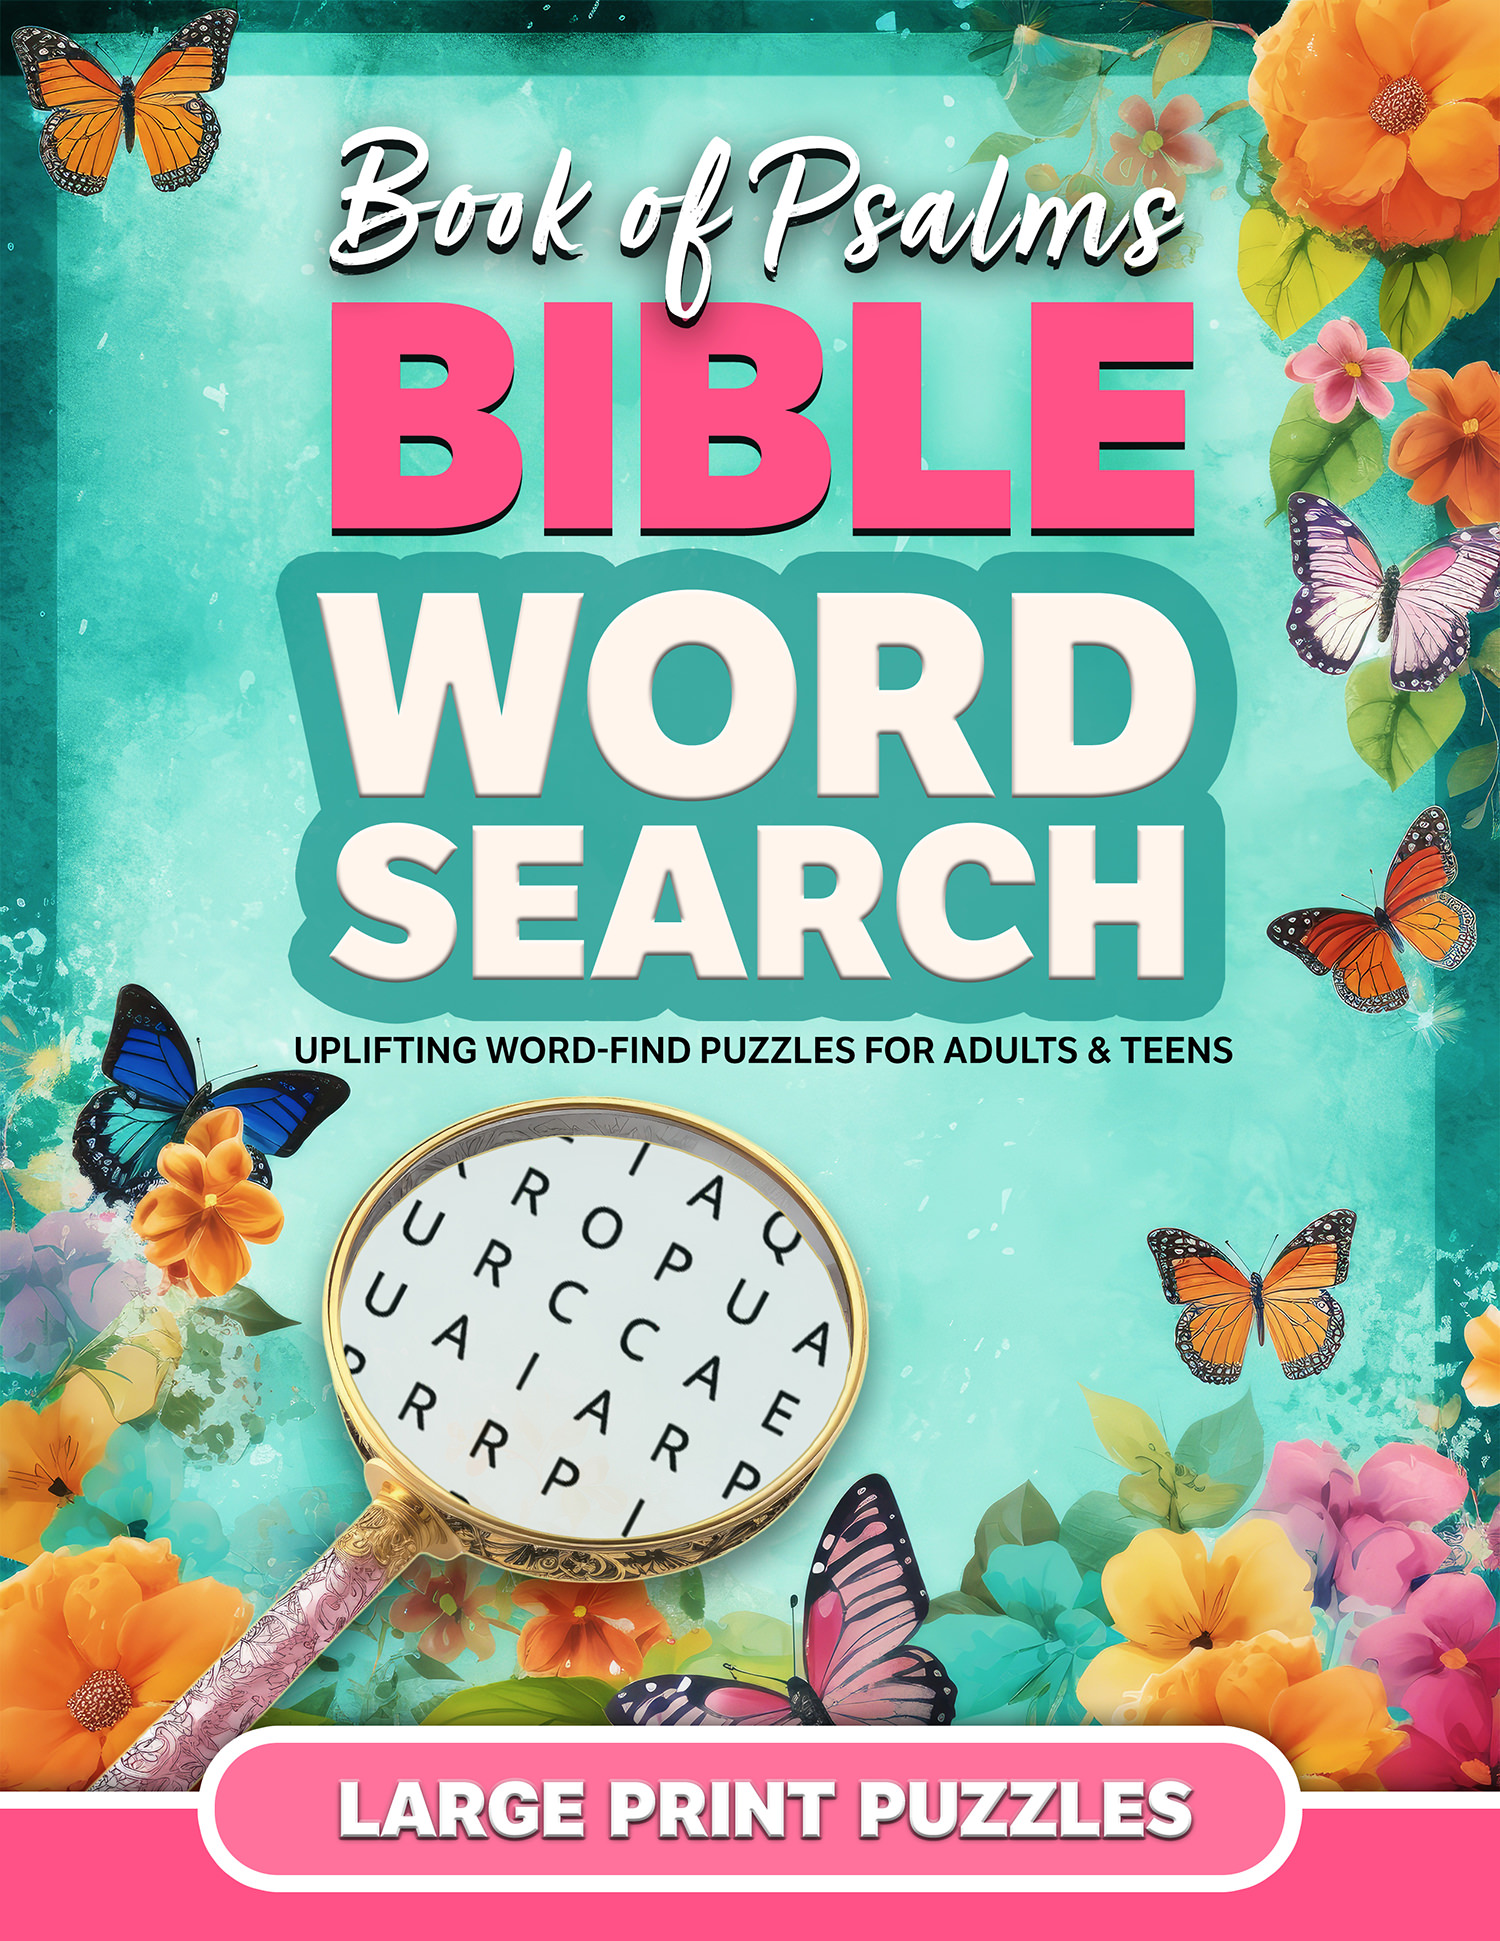 Book of Psalms Bible Word Search Puzzle Book (King James Version) — Heavenly Pages Press